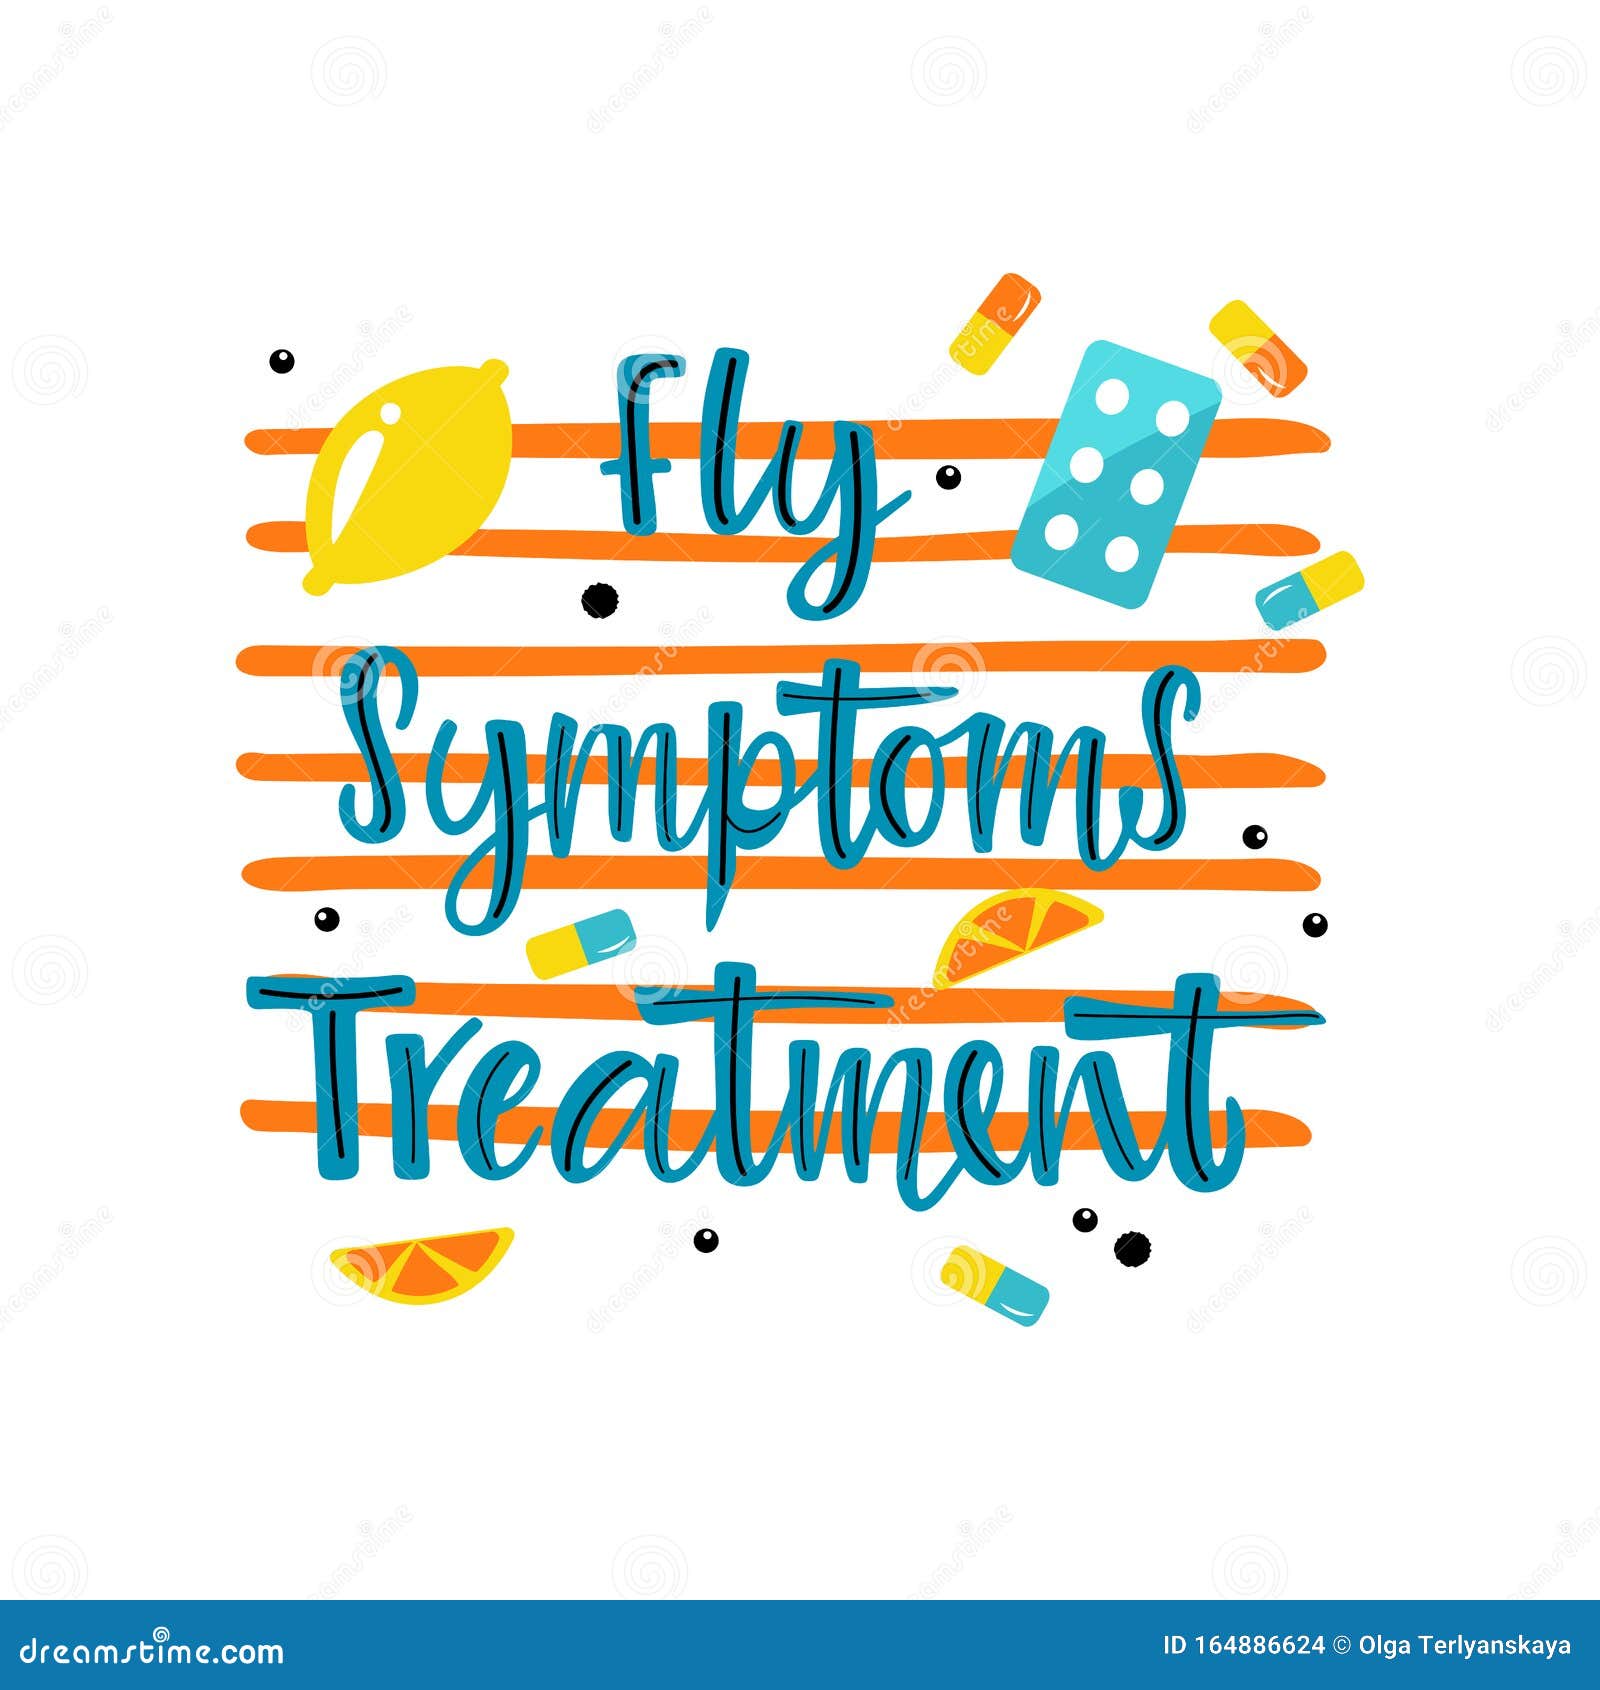 handwritten flu symptoms treatment with varios means and mediciness on on striped background.